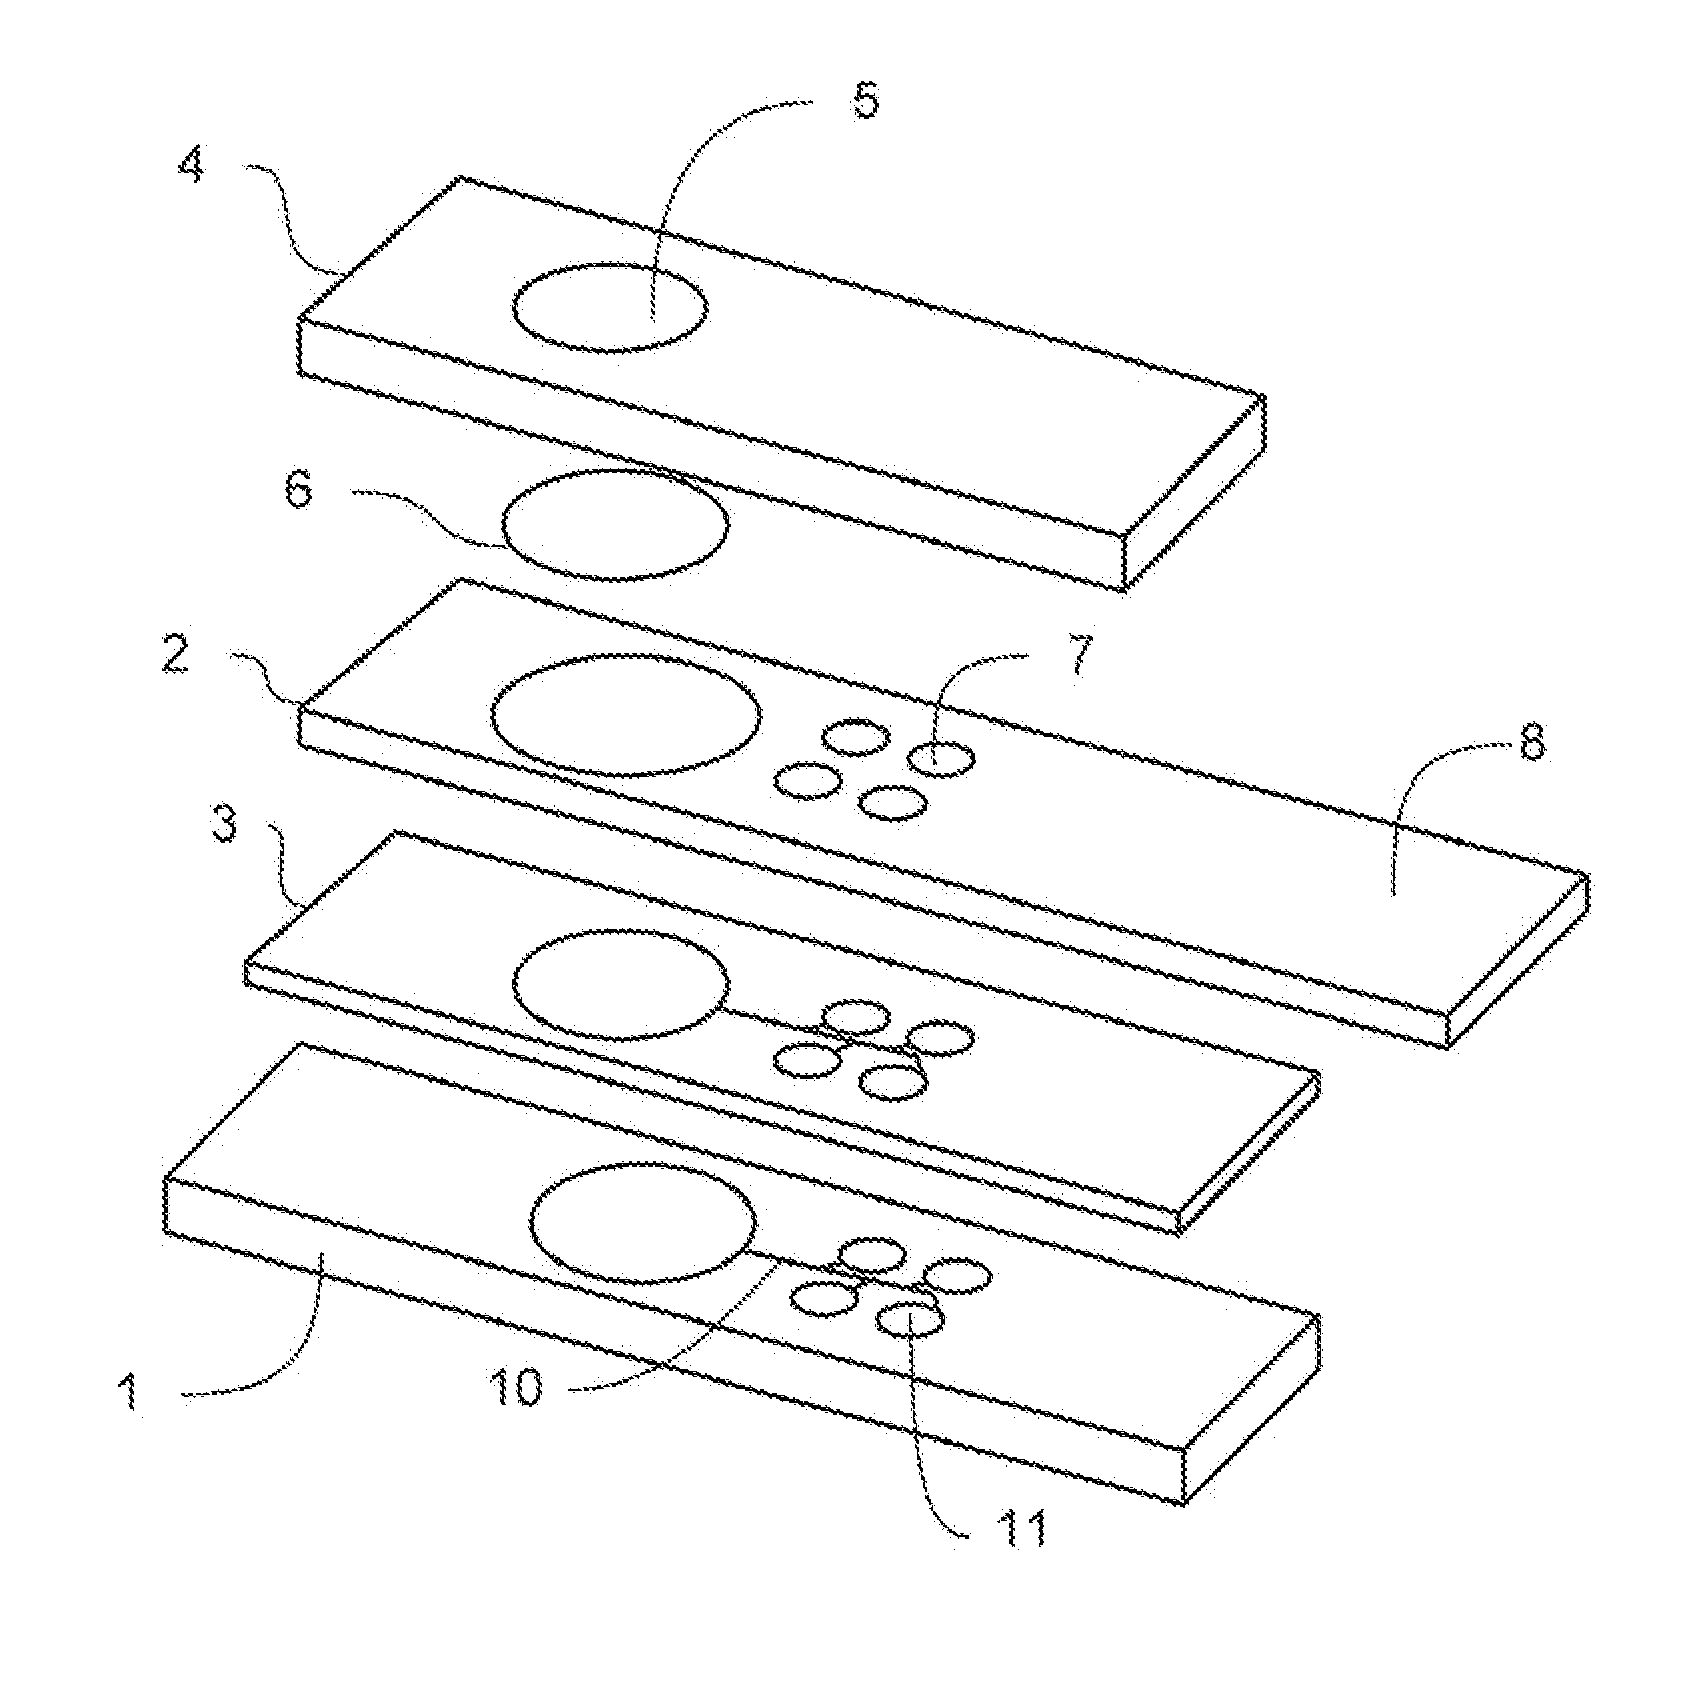 Channel for capillary flow, biosensor device and method for forming an object having a channel for capillary flow